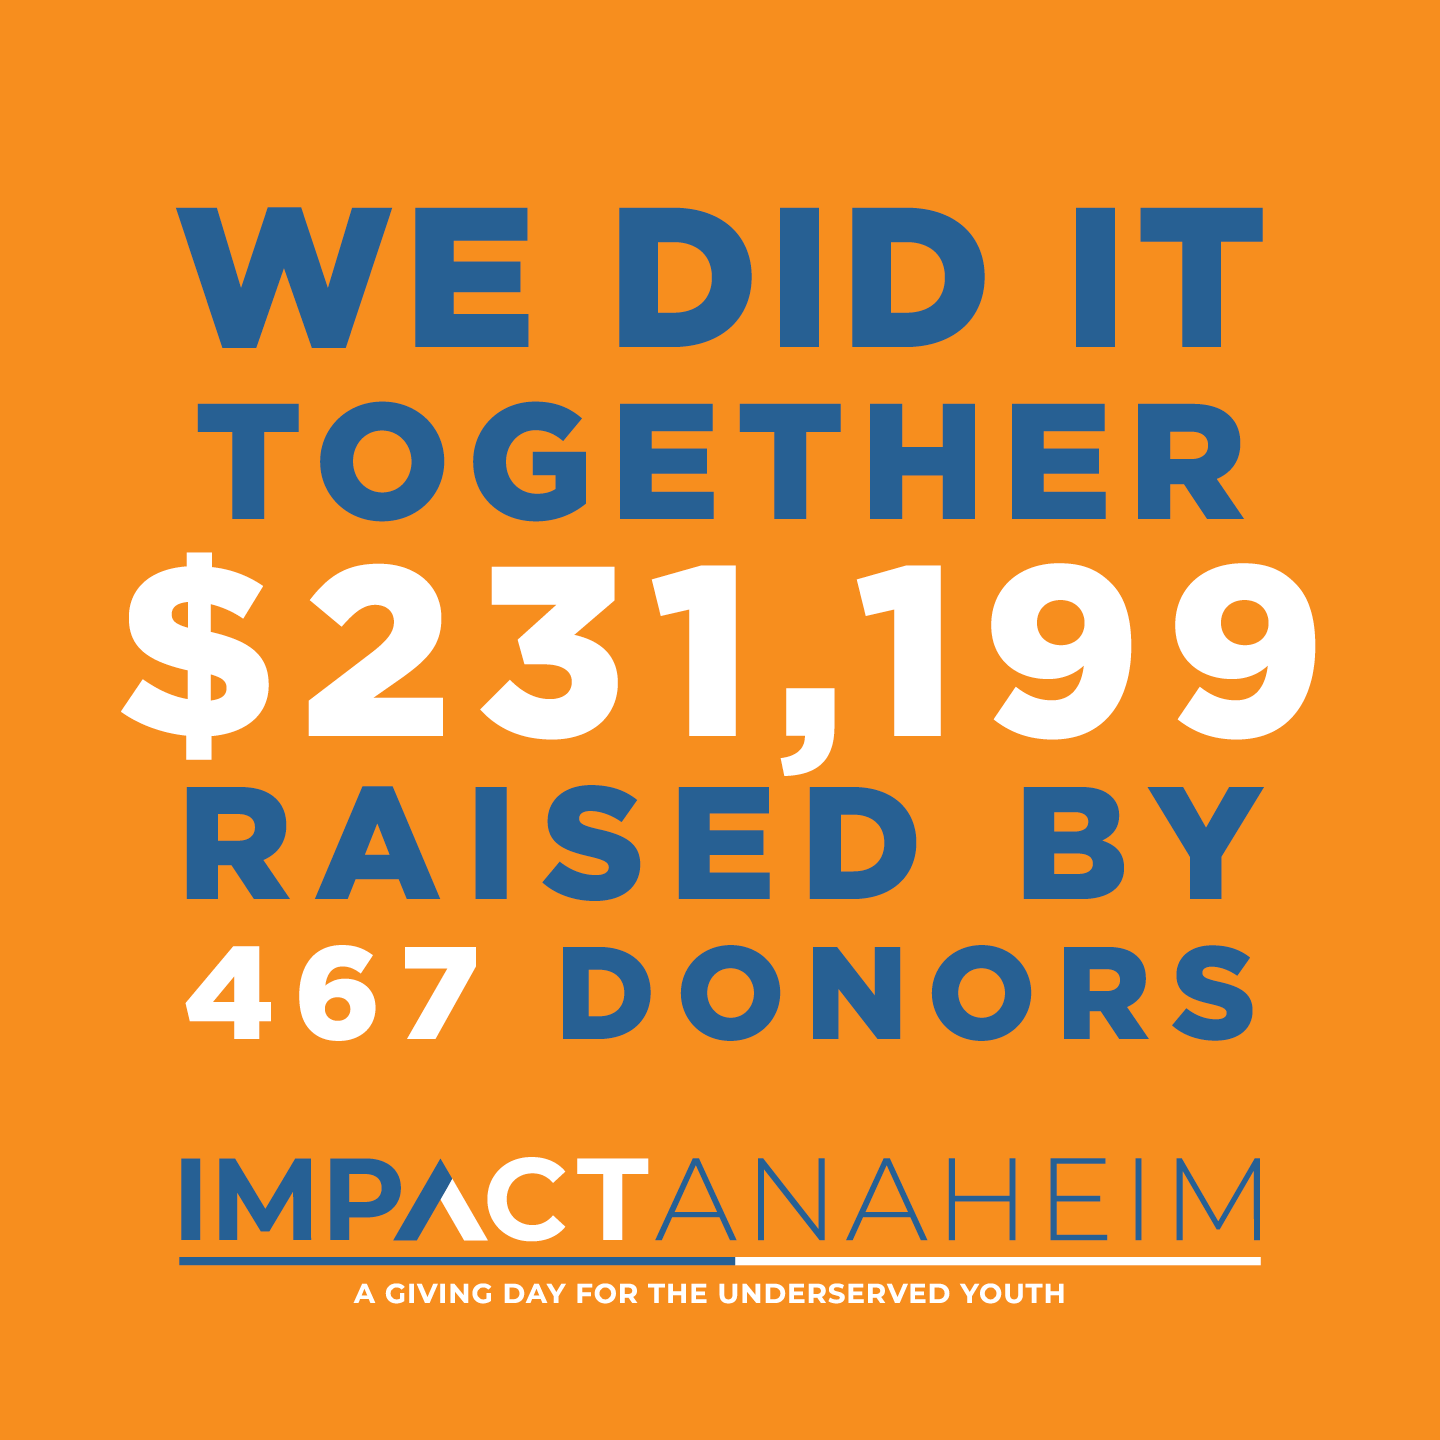 $231,199 Raised in 24 Hours to Support Anaheim Youth During “Impact Anaheim” Collaborative Giving Day